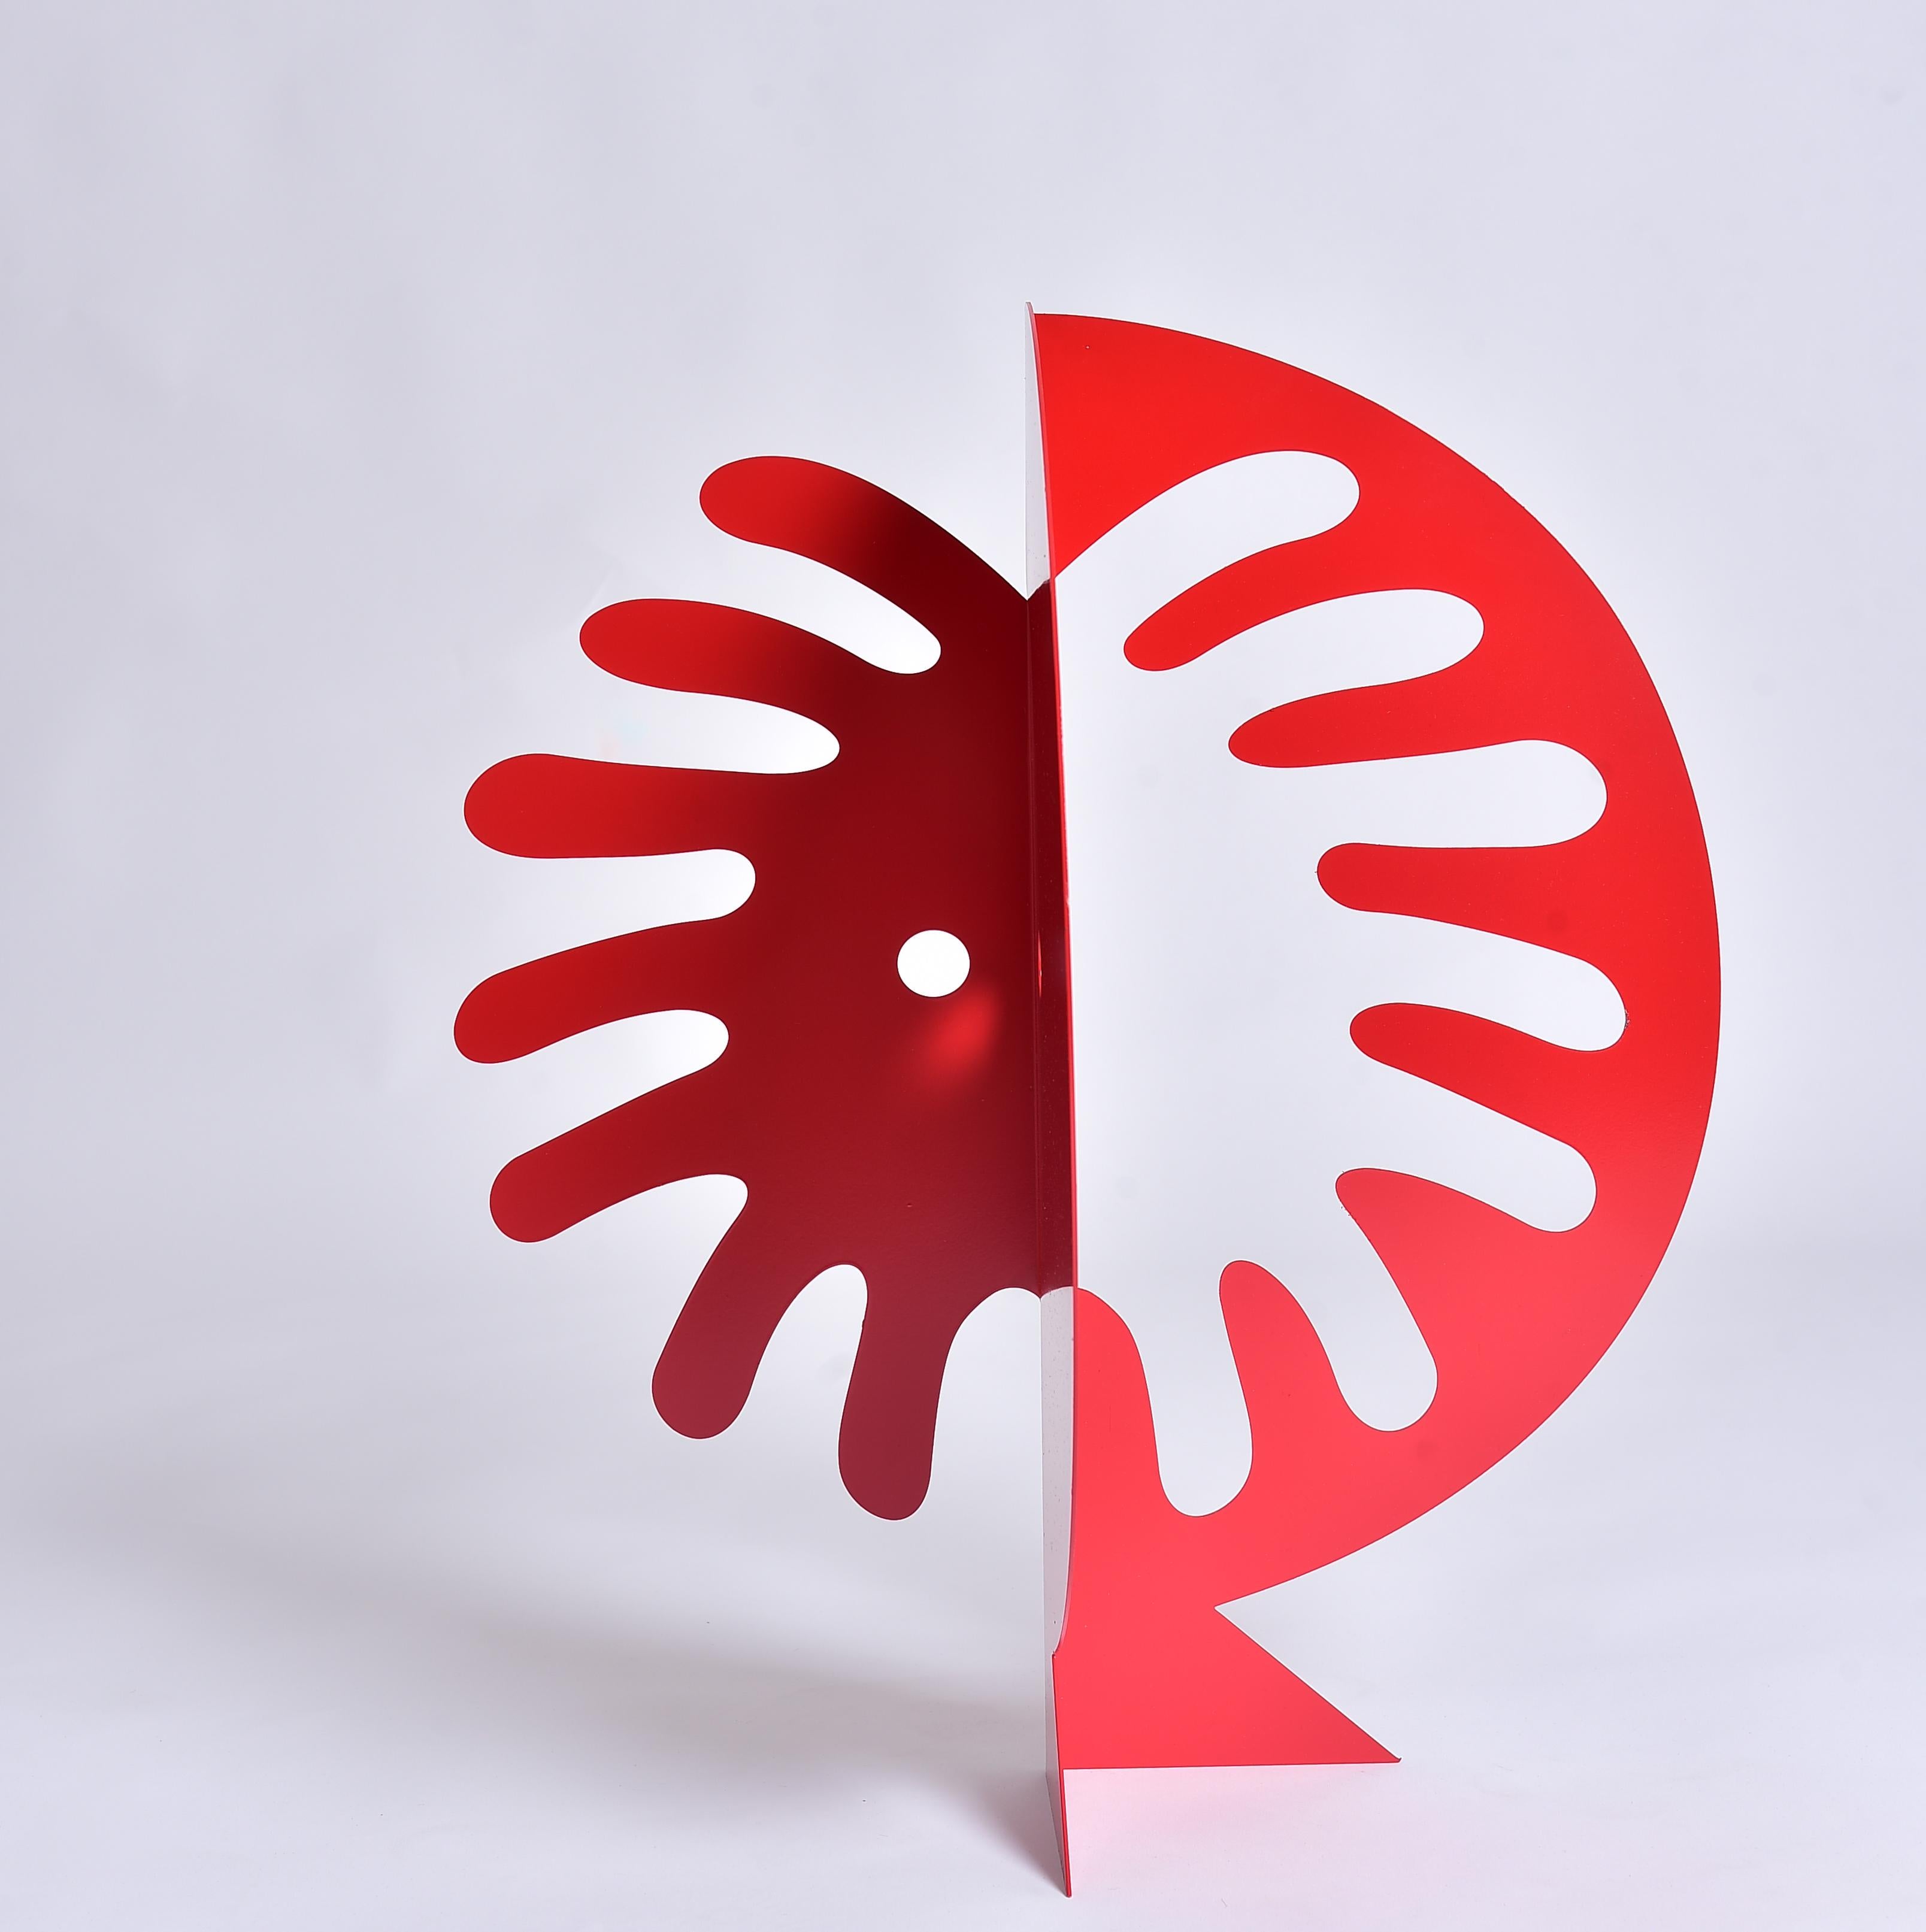 Red Sun - abstract figurative sculpture